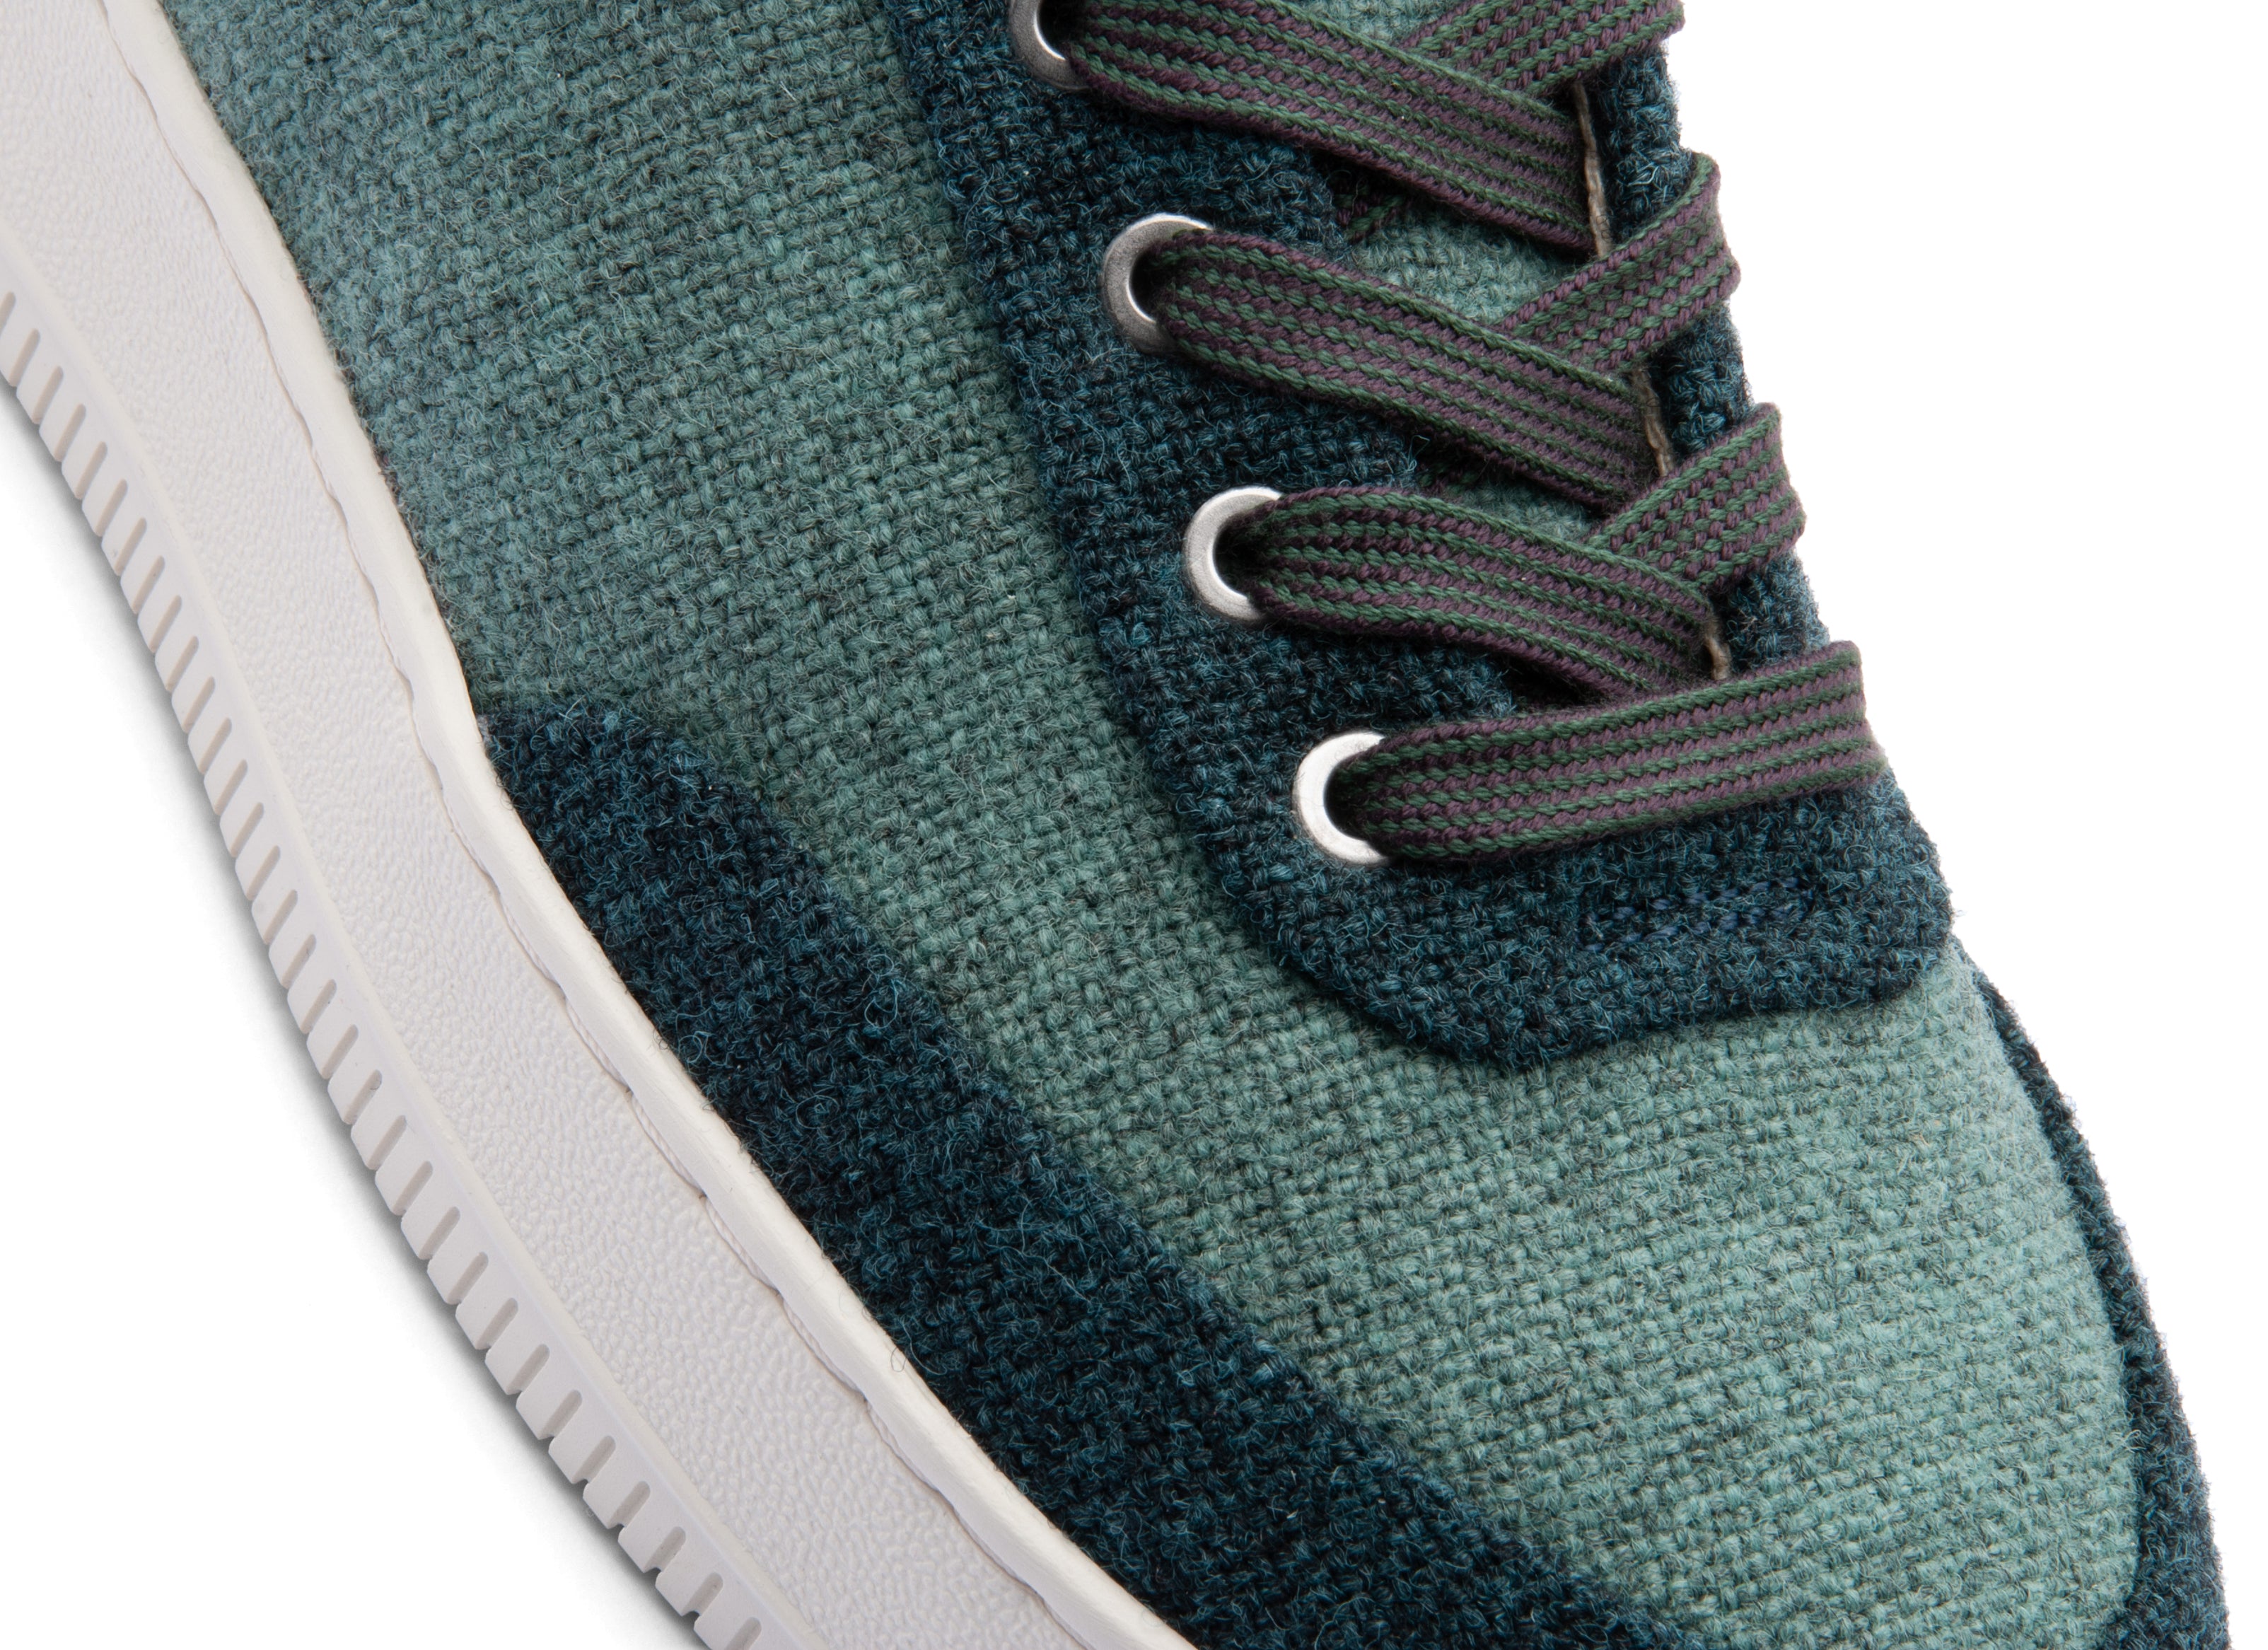 Low-top multicolored natural sneakers. Made from 100% thermoregulating and water-repellent wool with pure hemp lining, wool-covered cork insoles and super-flexible rubber outsoles. OEKO-TEX certified sneakers manufactured in the EU.